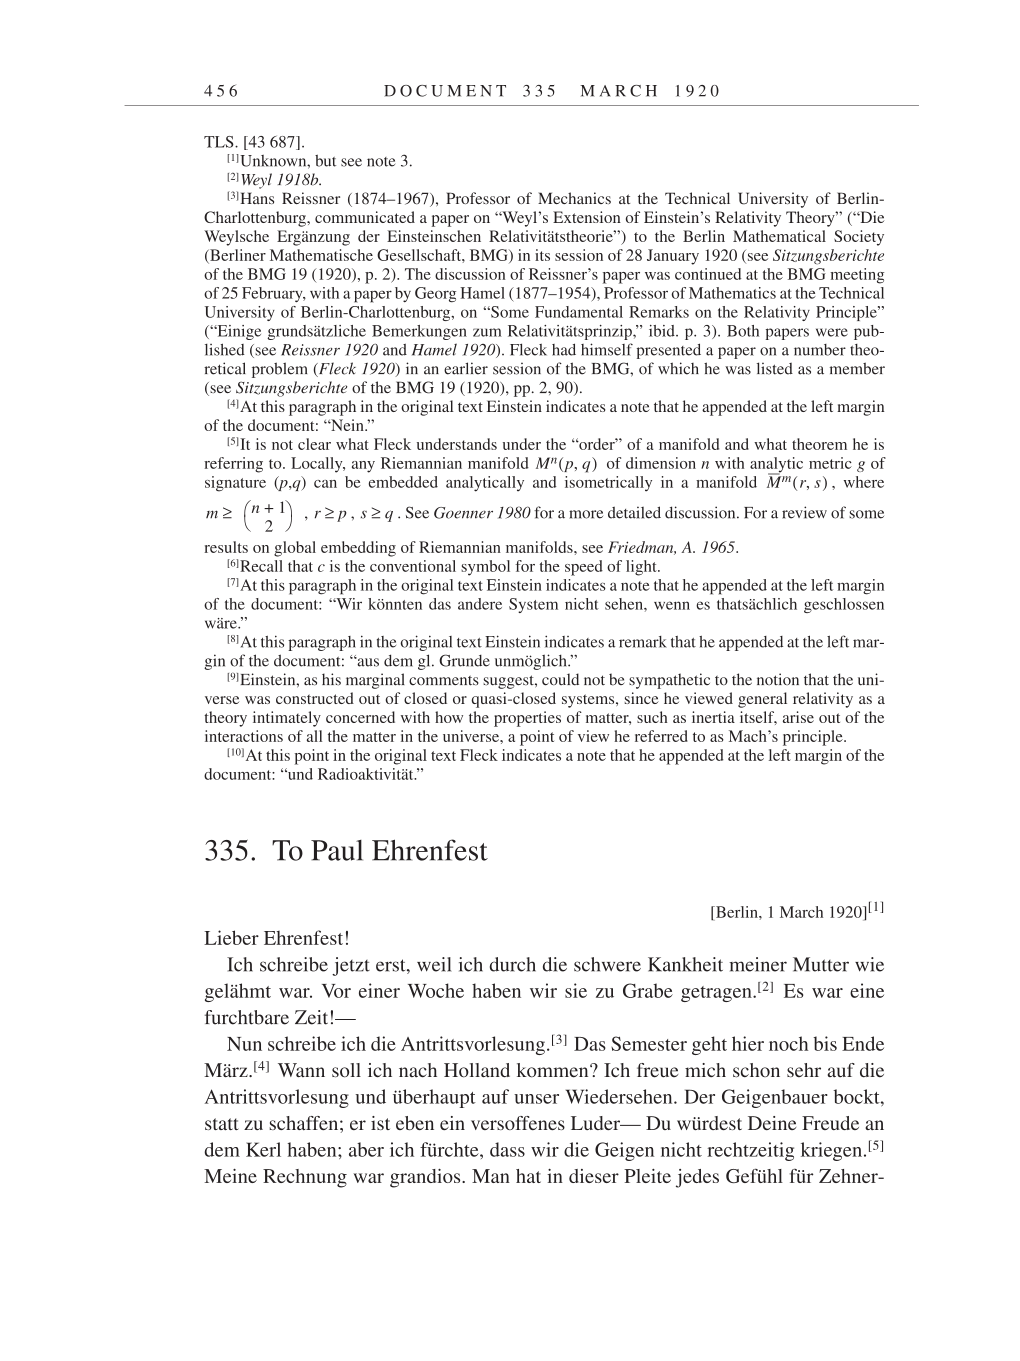 Volume 9: The Berlin Years: Correspondence January 1919-April 1920 page 456